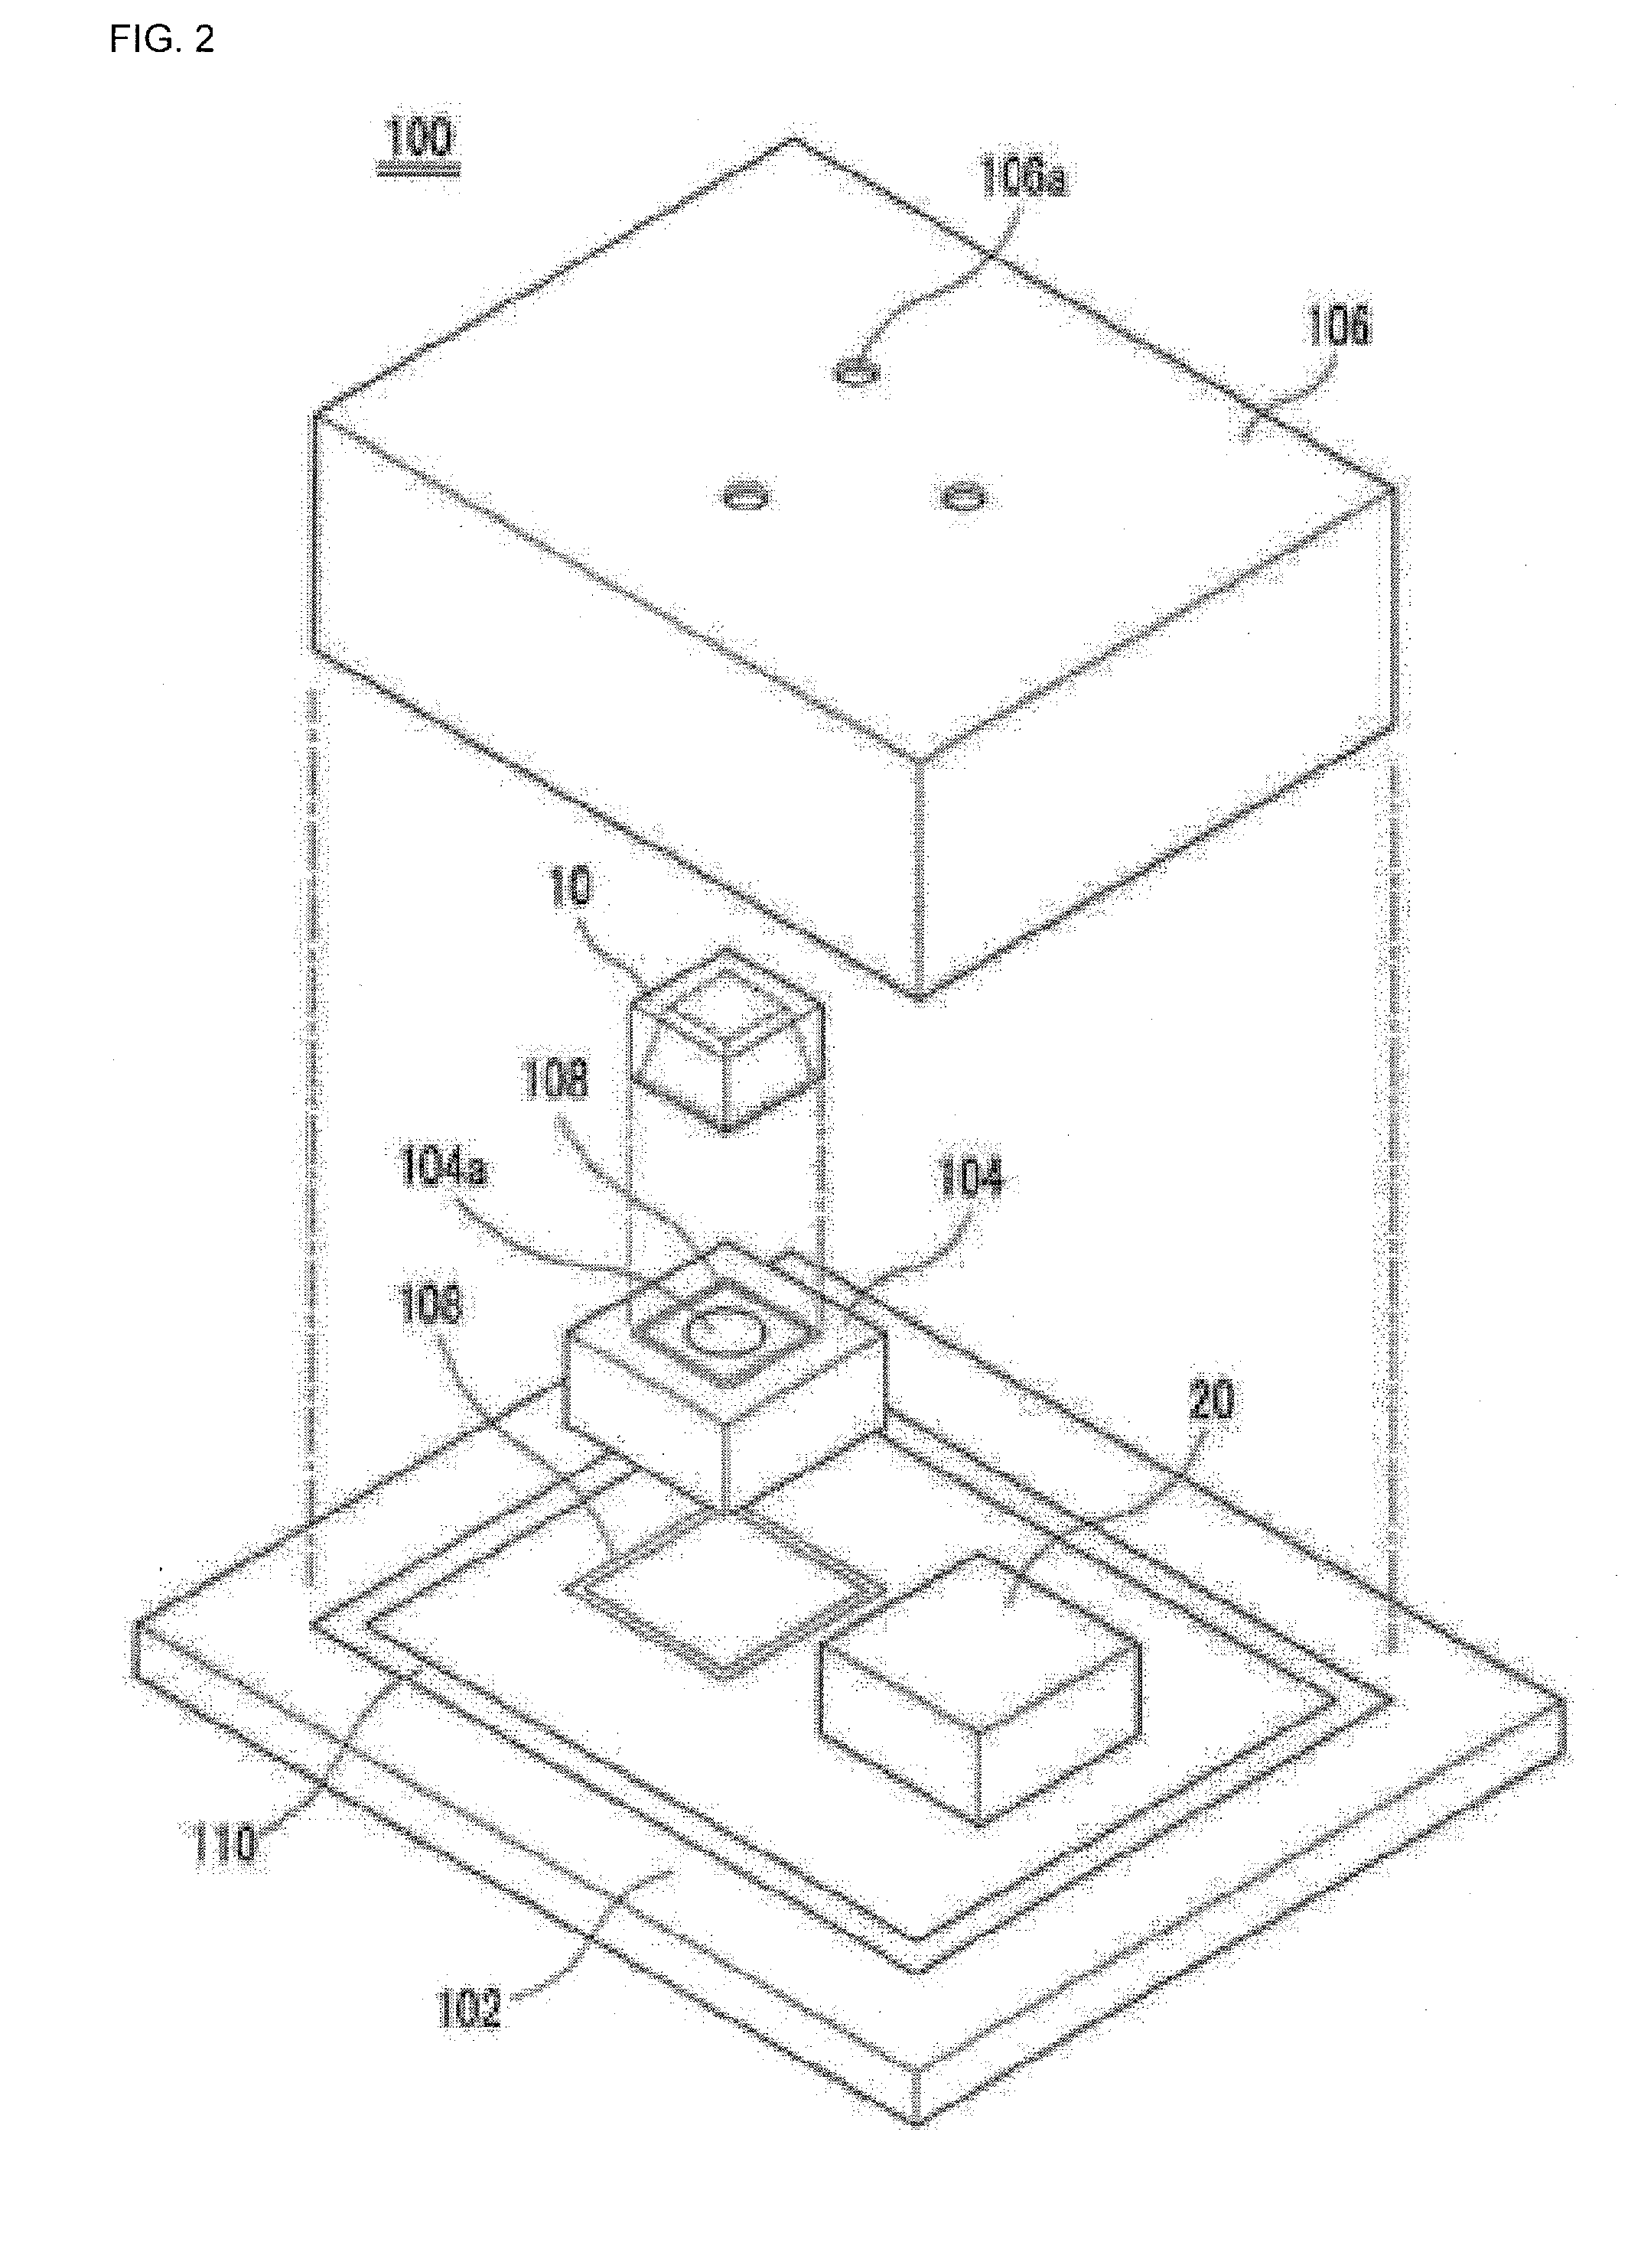 Silicon condenser microphone having an additional back chamber and a fabrication method therefor